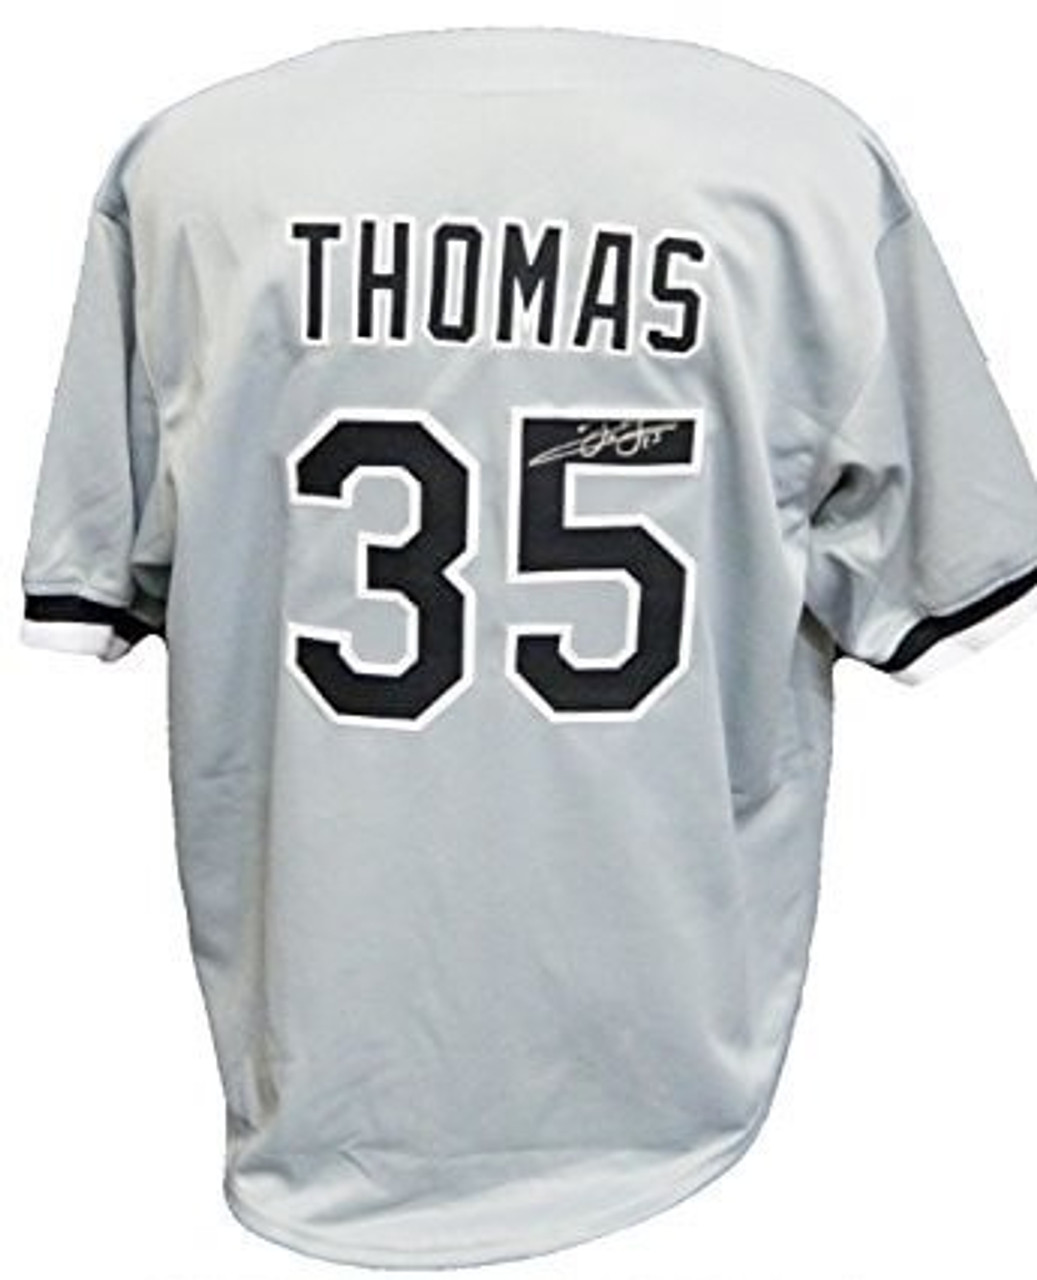 Chicago White Sox Frank Thomas Signed Grey Jersey - Schwartz Authenticated